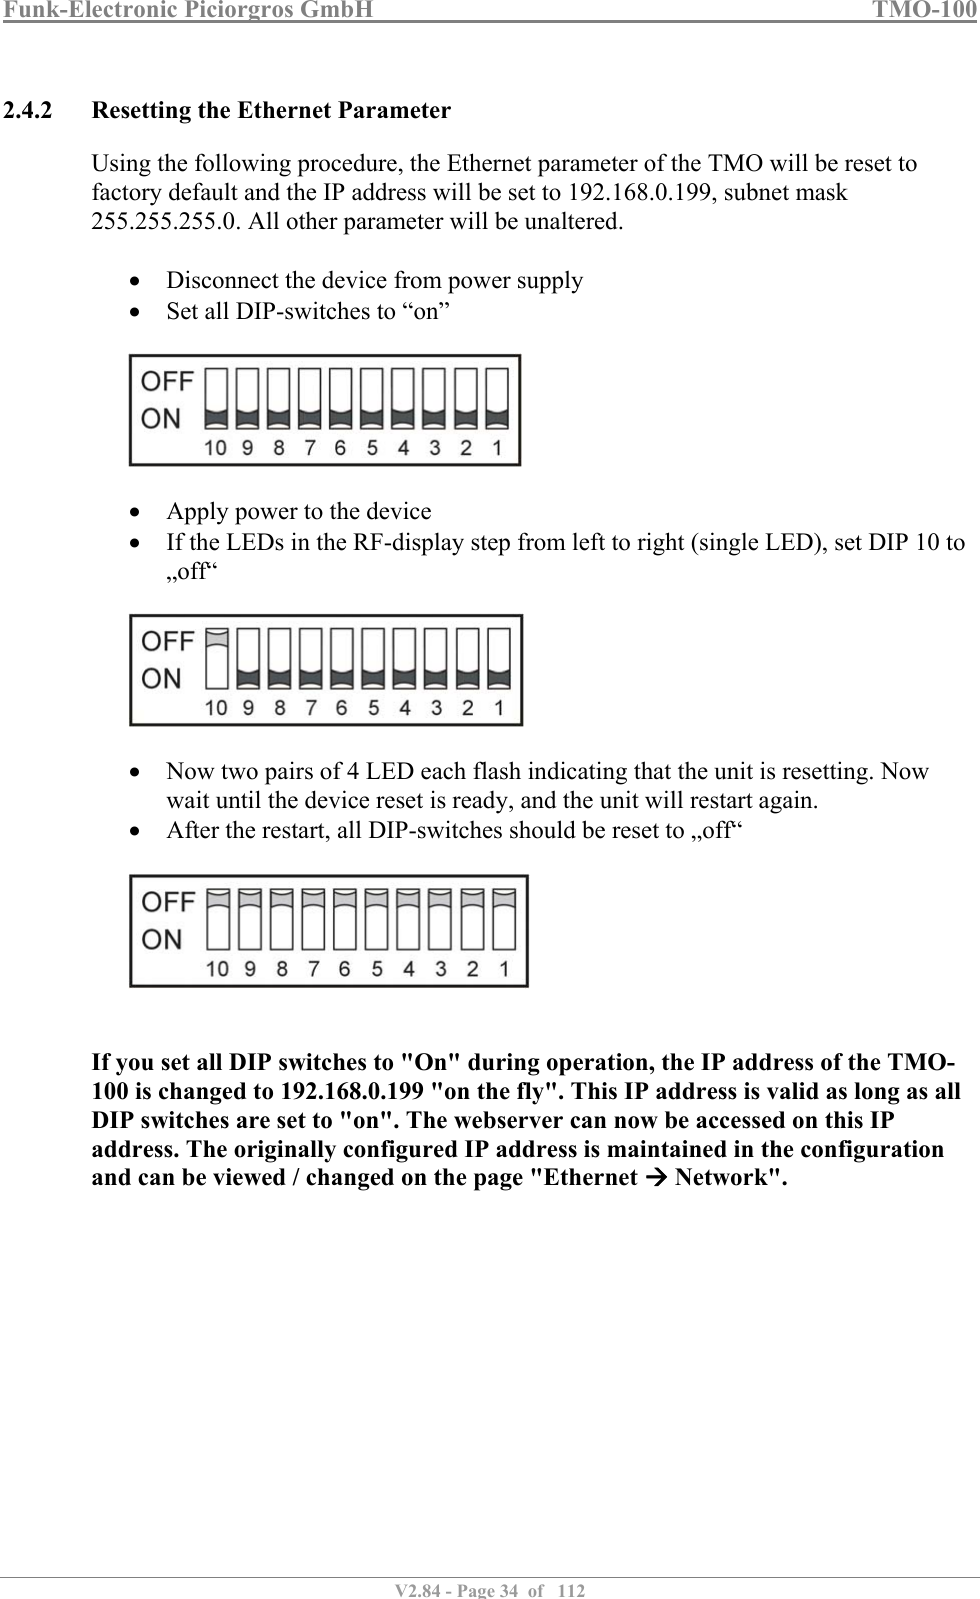 Funk-Electronic Piciorgros GmbH   TMO-100   V2.84 - Page 34  of   112   2.4.2 Resetting the Ethernet Parameter Using the following procedure, the Ethernet parameter of the TMO will be reset to factory default and the IP address will be set to 192.168.0.199, subnet mask 255.255.255.0. All other parameter will be unaltered.   Disconnect the device from power supply  Set all DIP-switches to “on”     Apply power to the device  If the LEDs in the RF-display step from left to right (single LED), set DIP 10 to „off“     Now two pairs of 4 LED each flash indicating that the unit is resetting. Now wait until the device reset is ready, and the unit will restart again.  After the restart, all DIP-switches should be reset to „off“     If you set all DIP switches to &quot;On&quot; during operation, the IP address of the TMO-100 is changed to 192.168.0.199 &quot;on the fly&quot;. This IP address is valid as long as all DIP switches are set to &quot;on&quot;. The webserver can now be accessed on this IP address. The originally configured IP address is maintained in the configuration and can be viewed / changed on the page &quot;Ethernet  Network&quot;. 